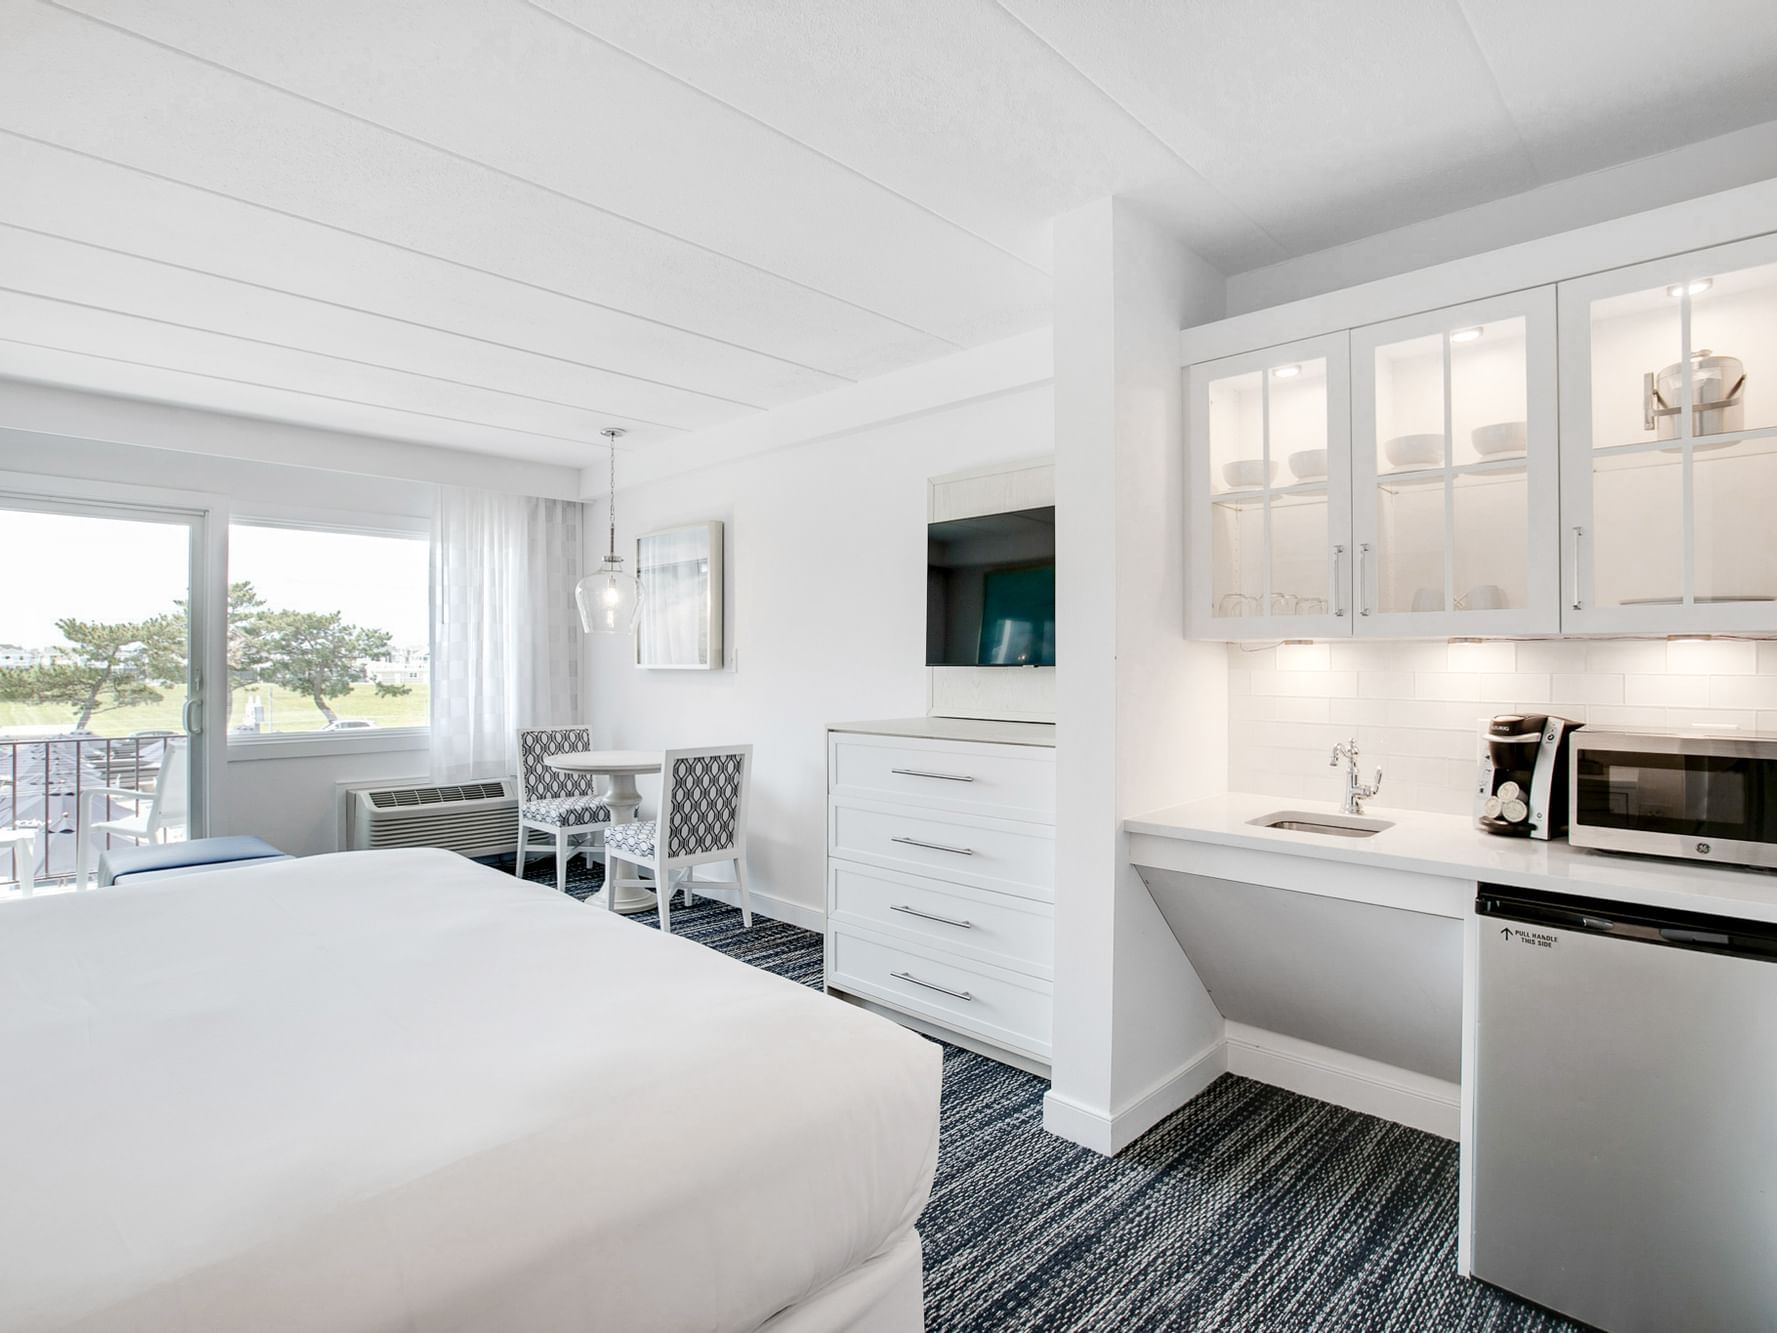 Signature King Studio ADA Accessible Hotel Room with Kitchenette at ICONA Windrift in Avalon NJ